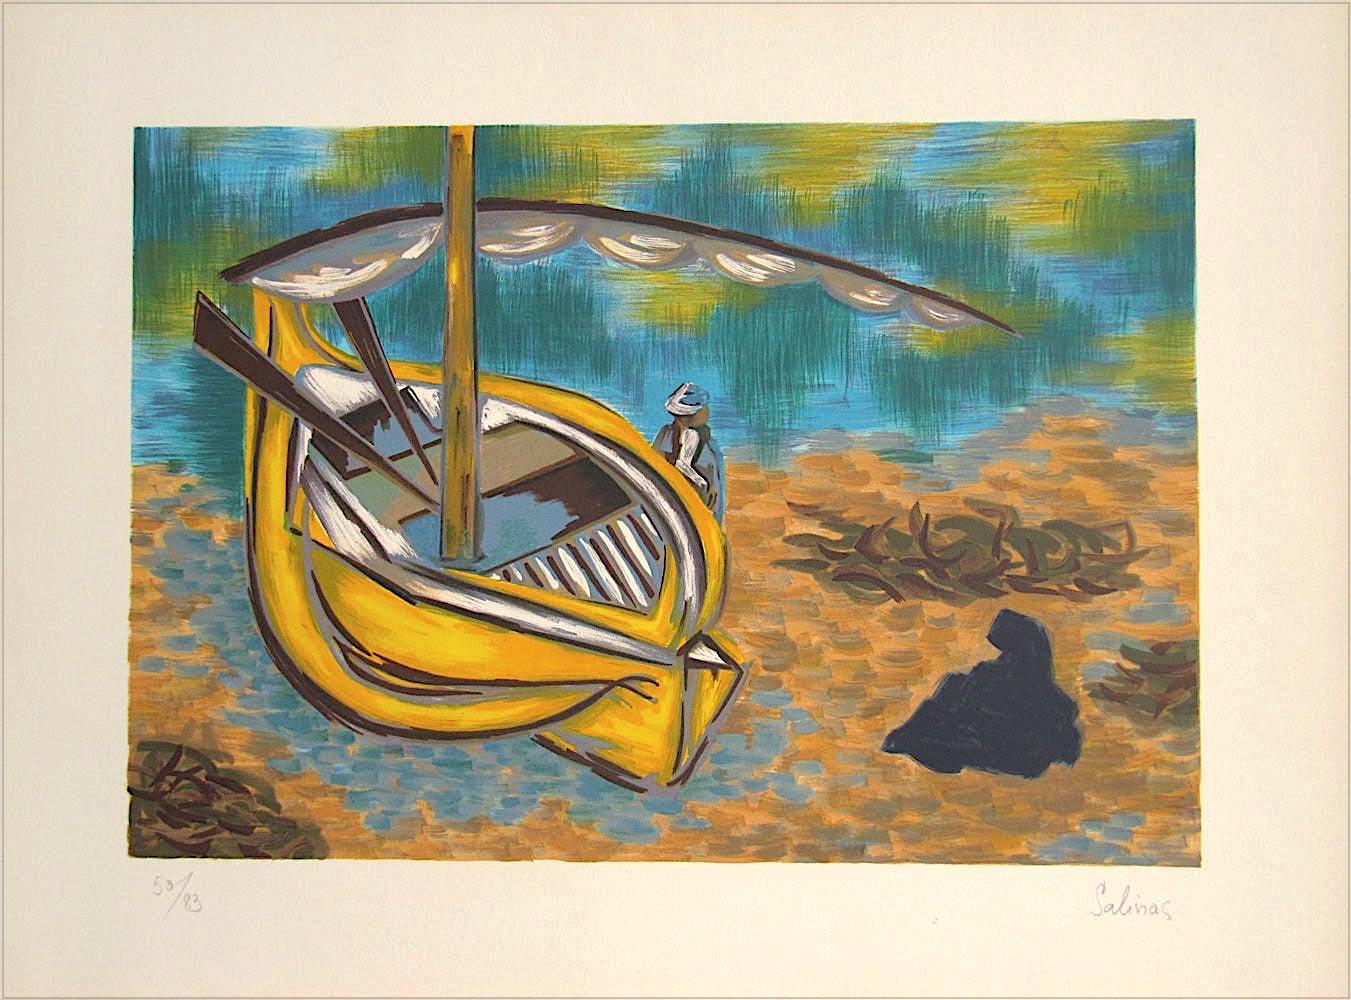 YELLOW BOAT Signed Lithograph, Man Leaning on Yellow Sail Boat, Turquoise Water